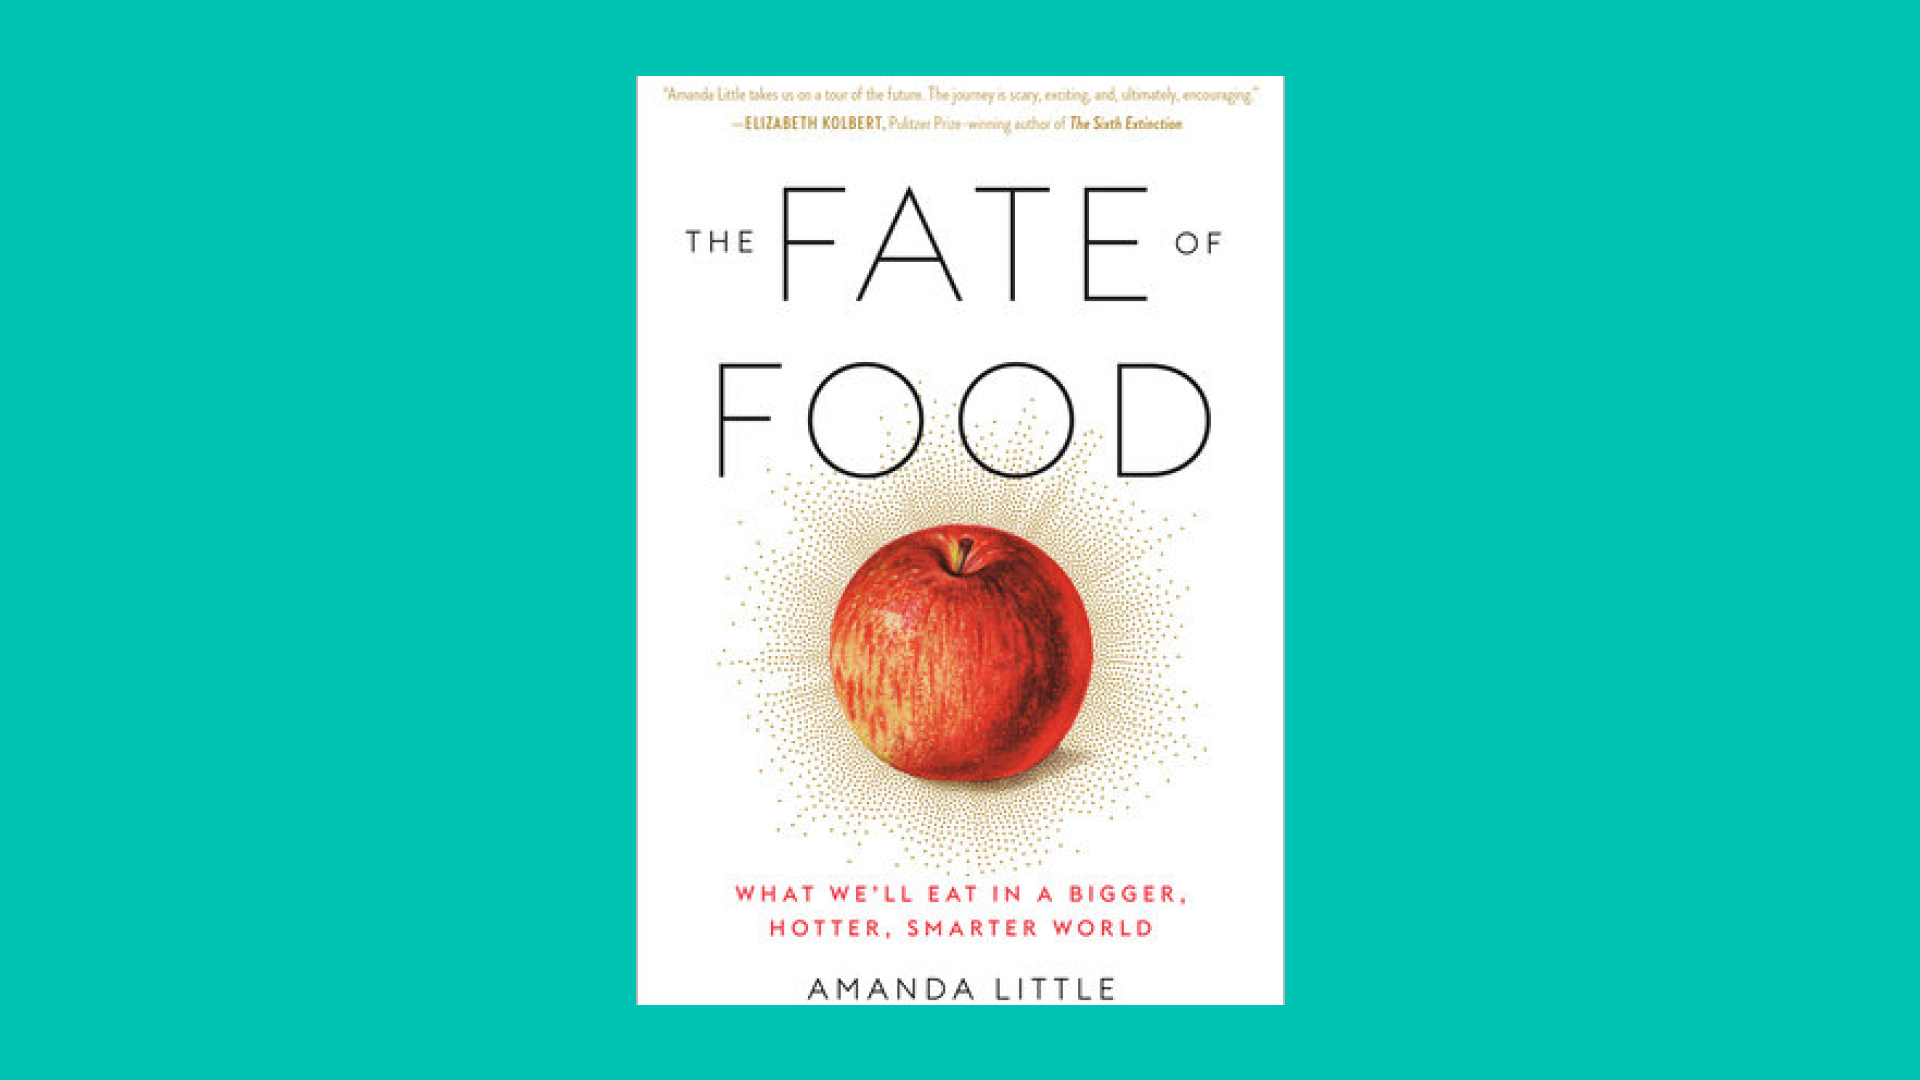 “The Fate of Food” by Amanda Little